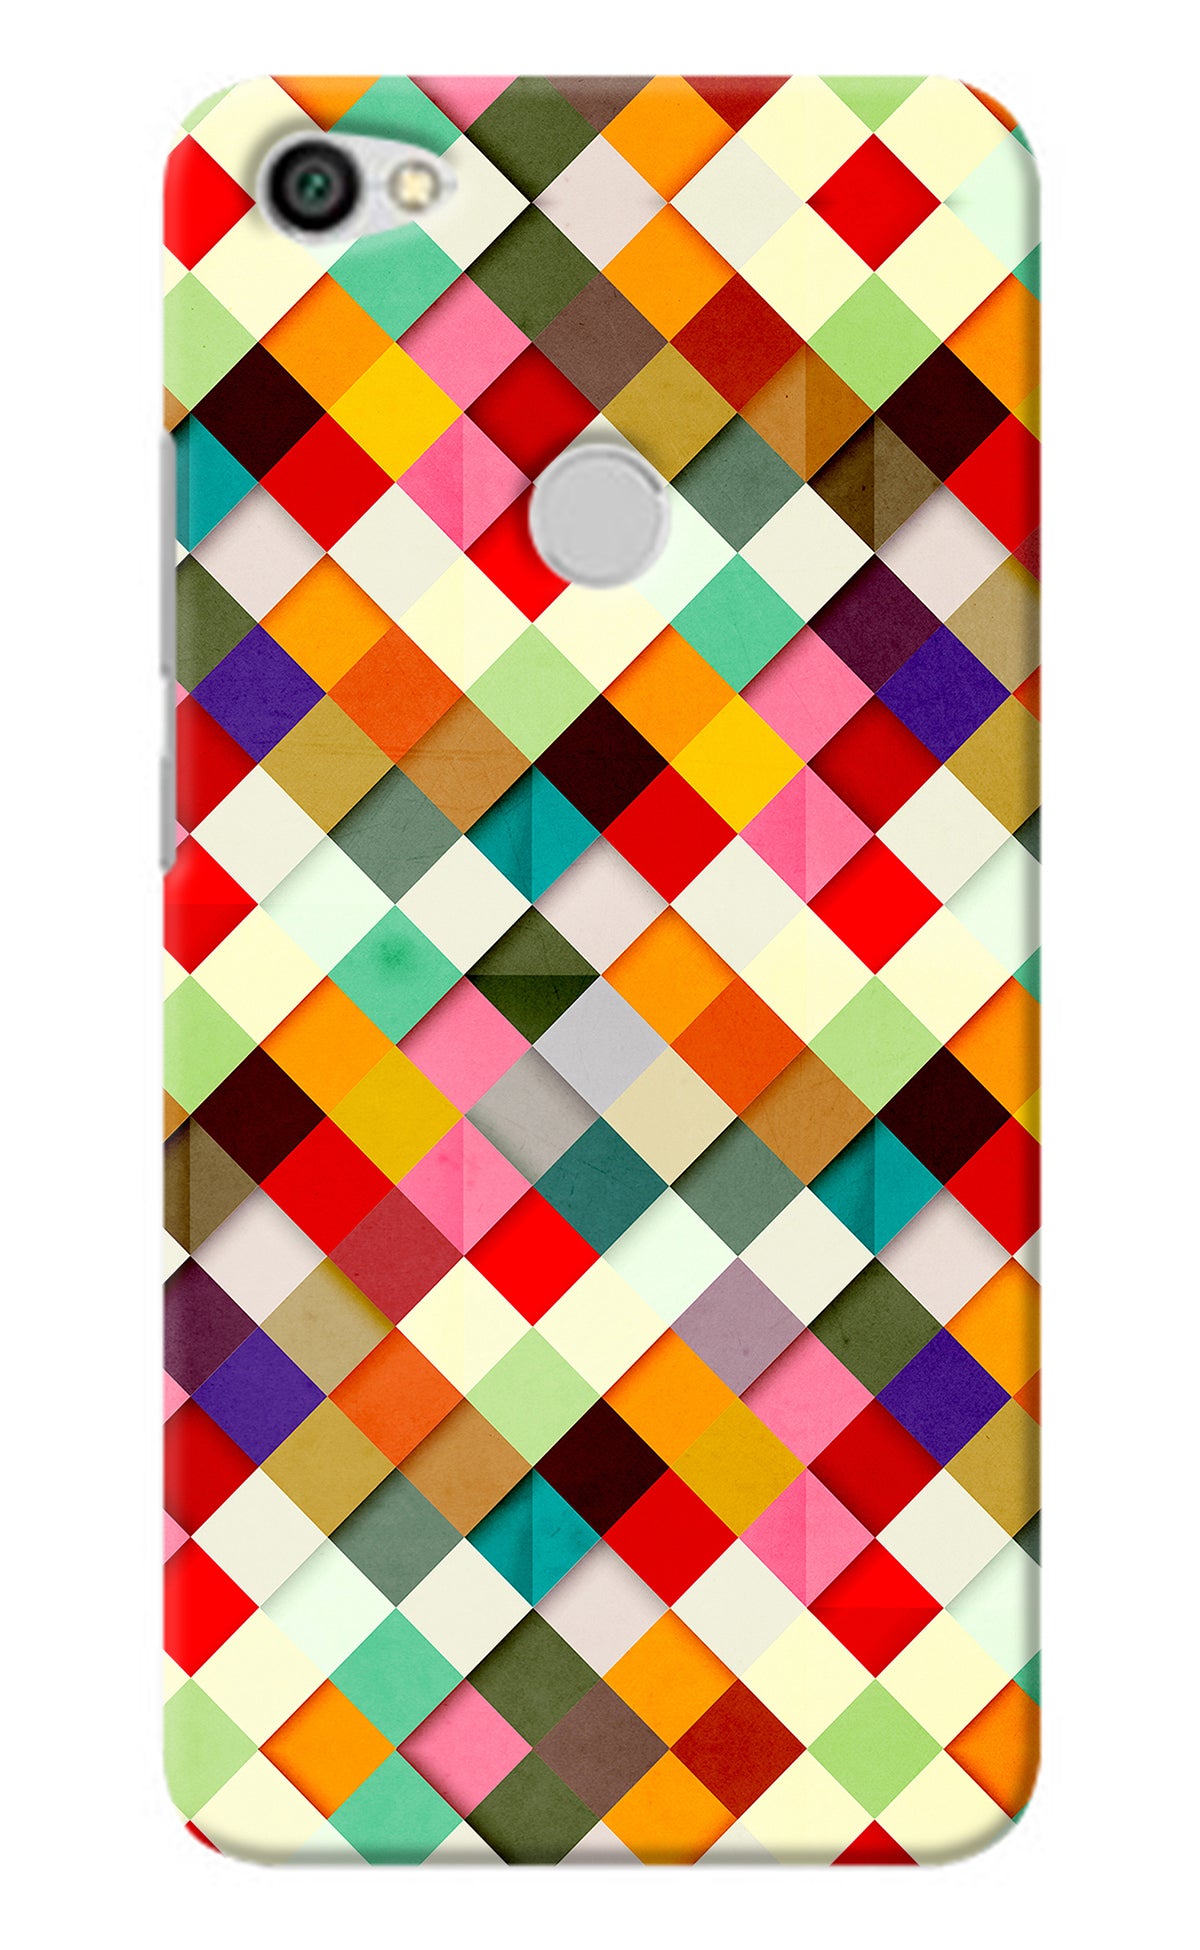 Geometric Abstract Colorful Redmi Y1 Back Cover